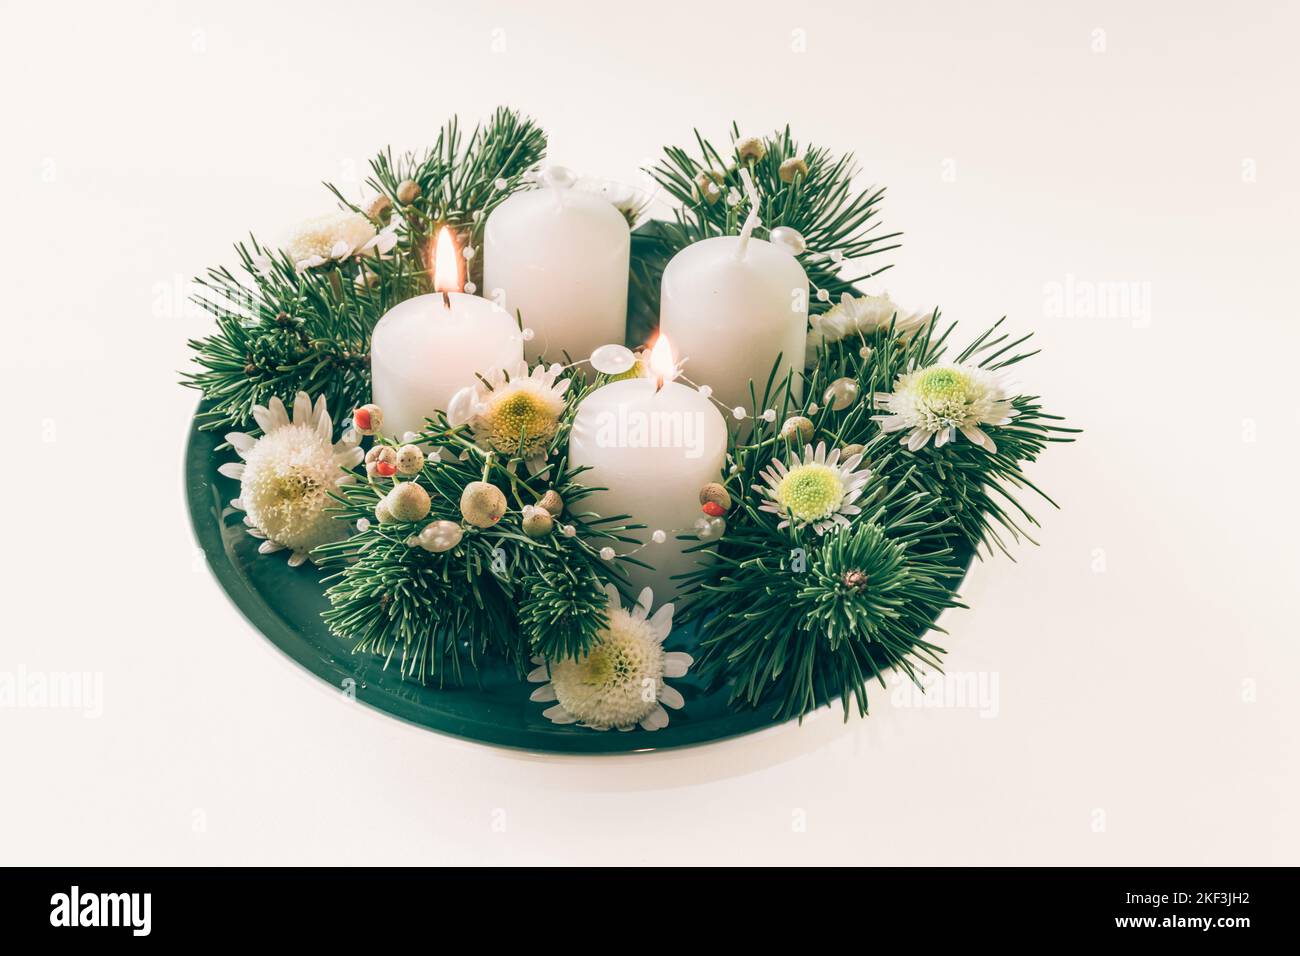 4 white advent candles in religious cristian traditional wreath decorated with green fir and flowers Stock Photo